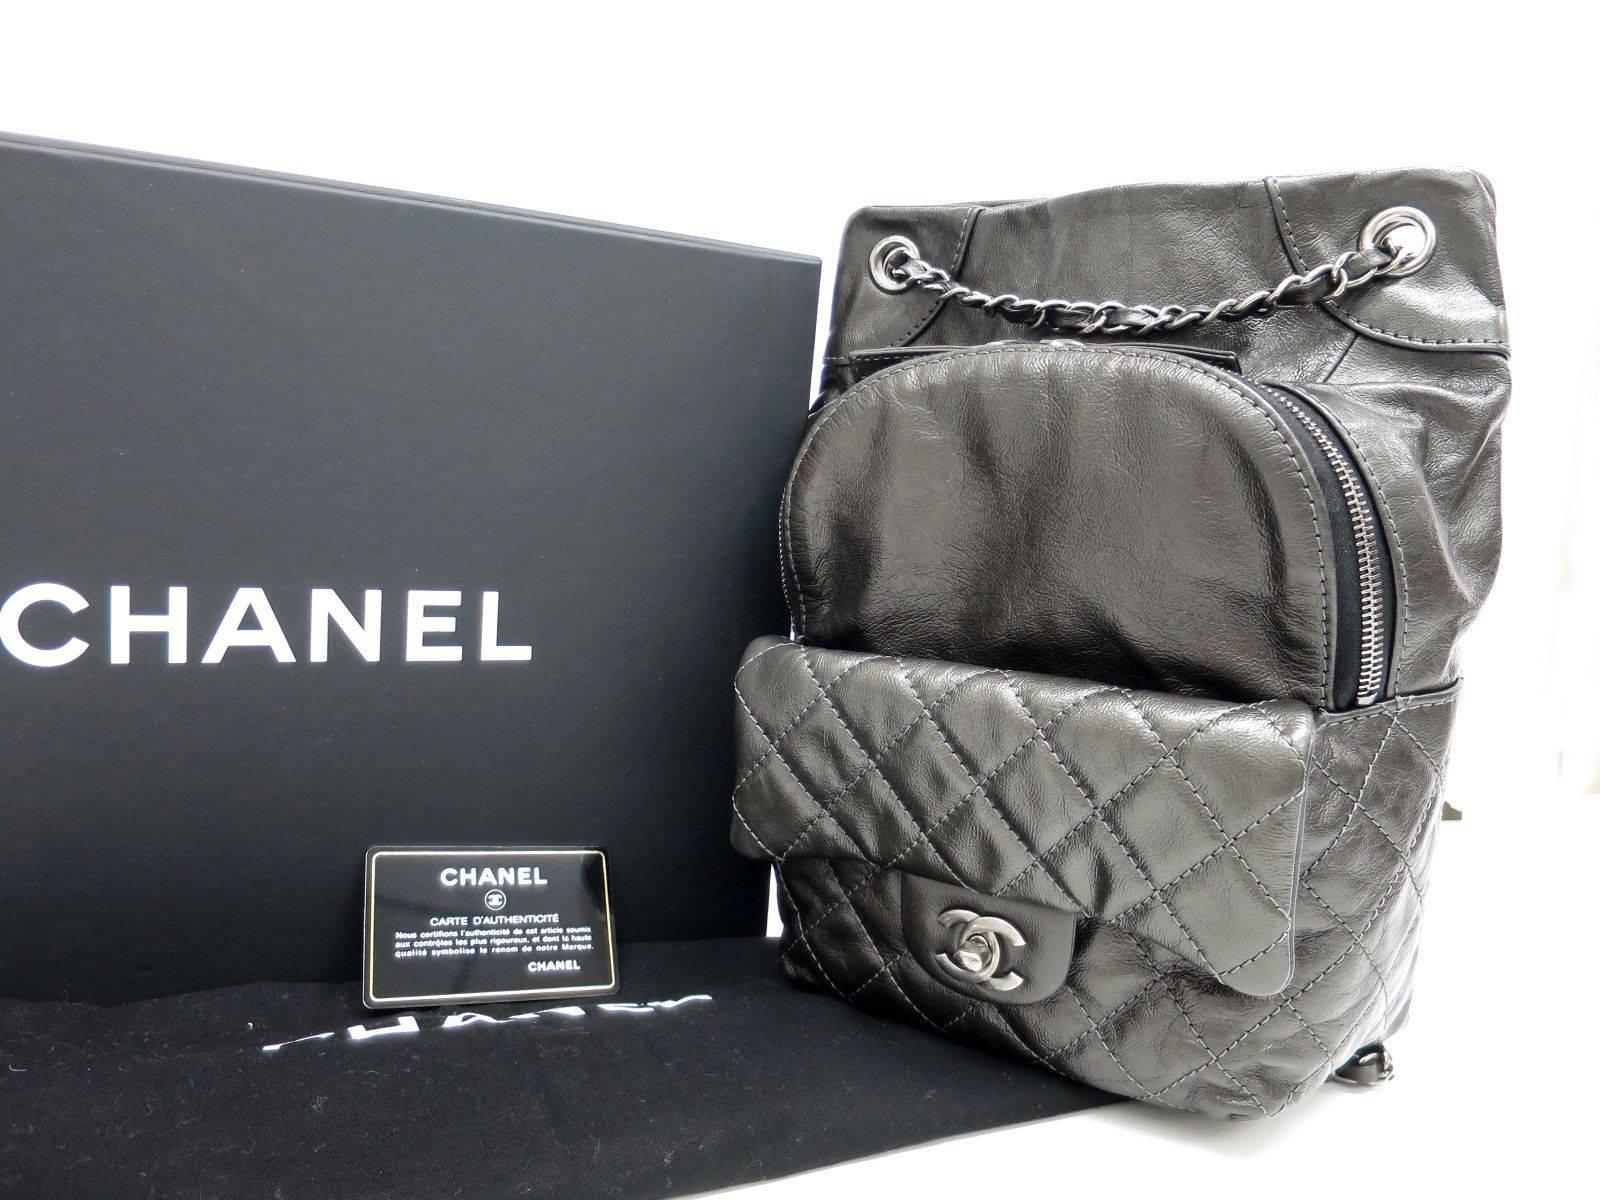 CURATOR'S NOTES

It gets no better!  Ultra chic quilted lambskin leather Chanel backpack featuring silver chain straps and ALL original accessories.

Don't miss your chance to add this rare gem to your CoCo collection!

Lambskin
Silver